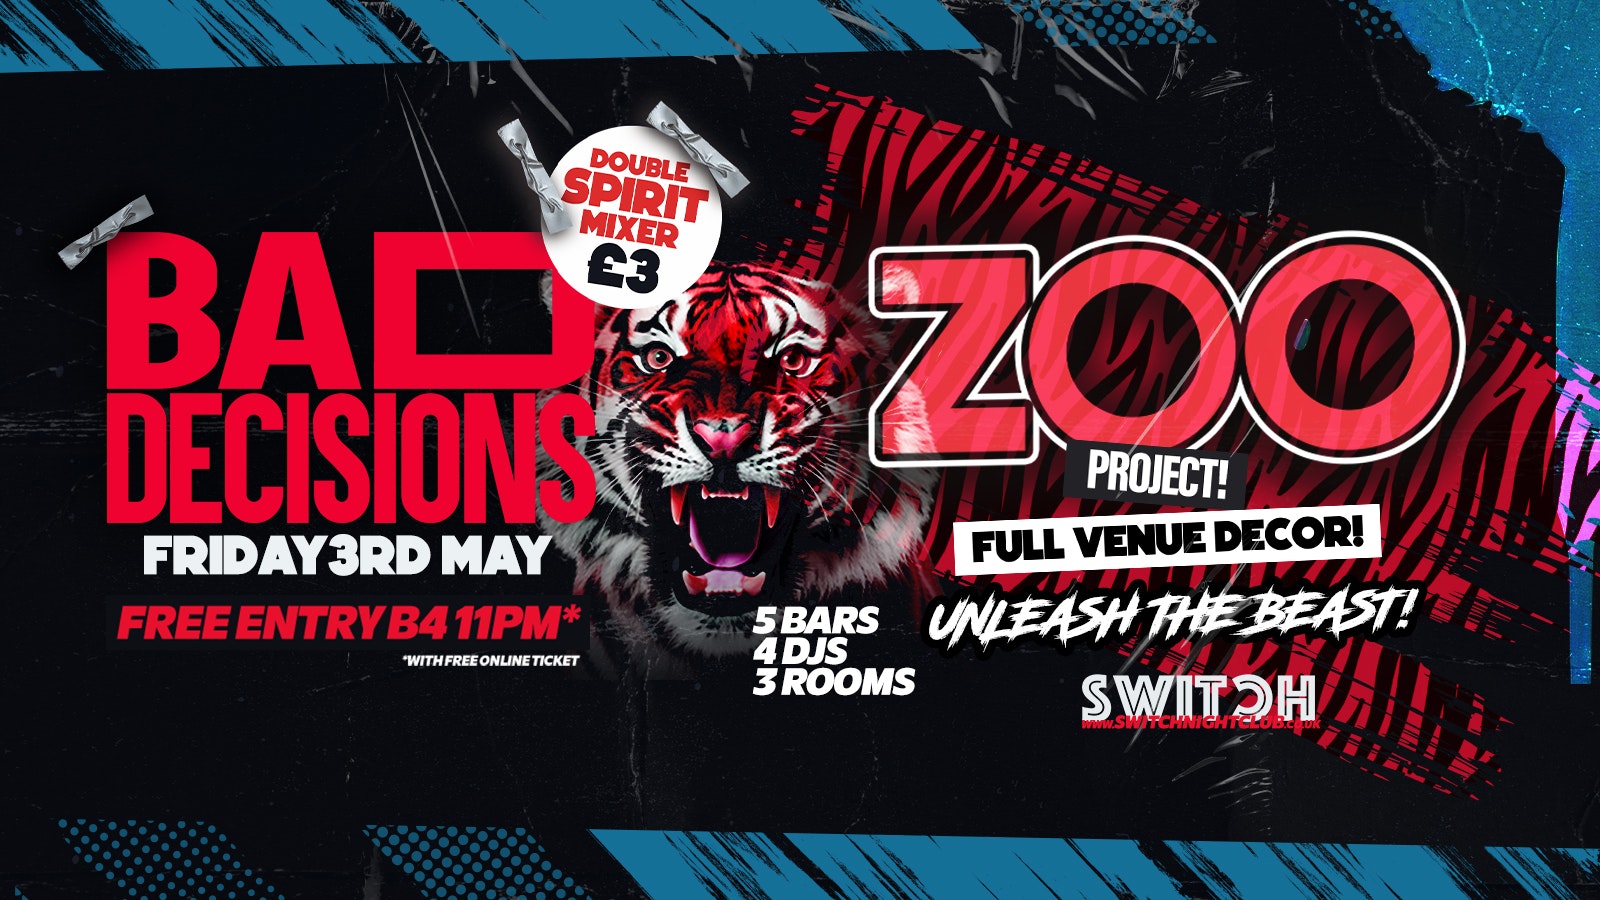 Bad Decisions | ZOO PORJECT Fridays @ SWITCH | £3 DBL Spirit Mixers ALL NIGHT